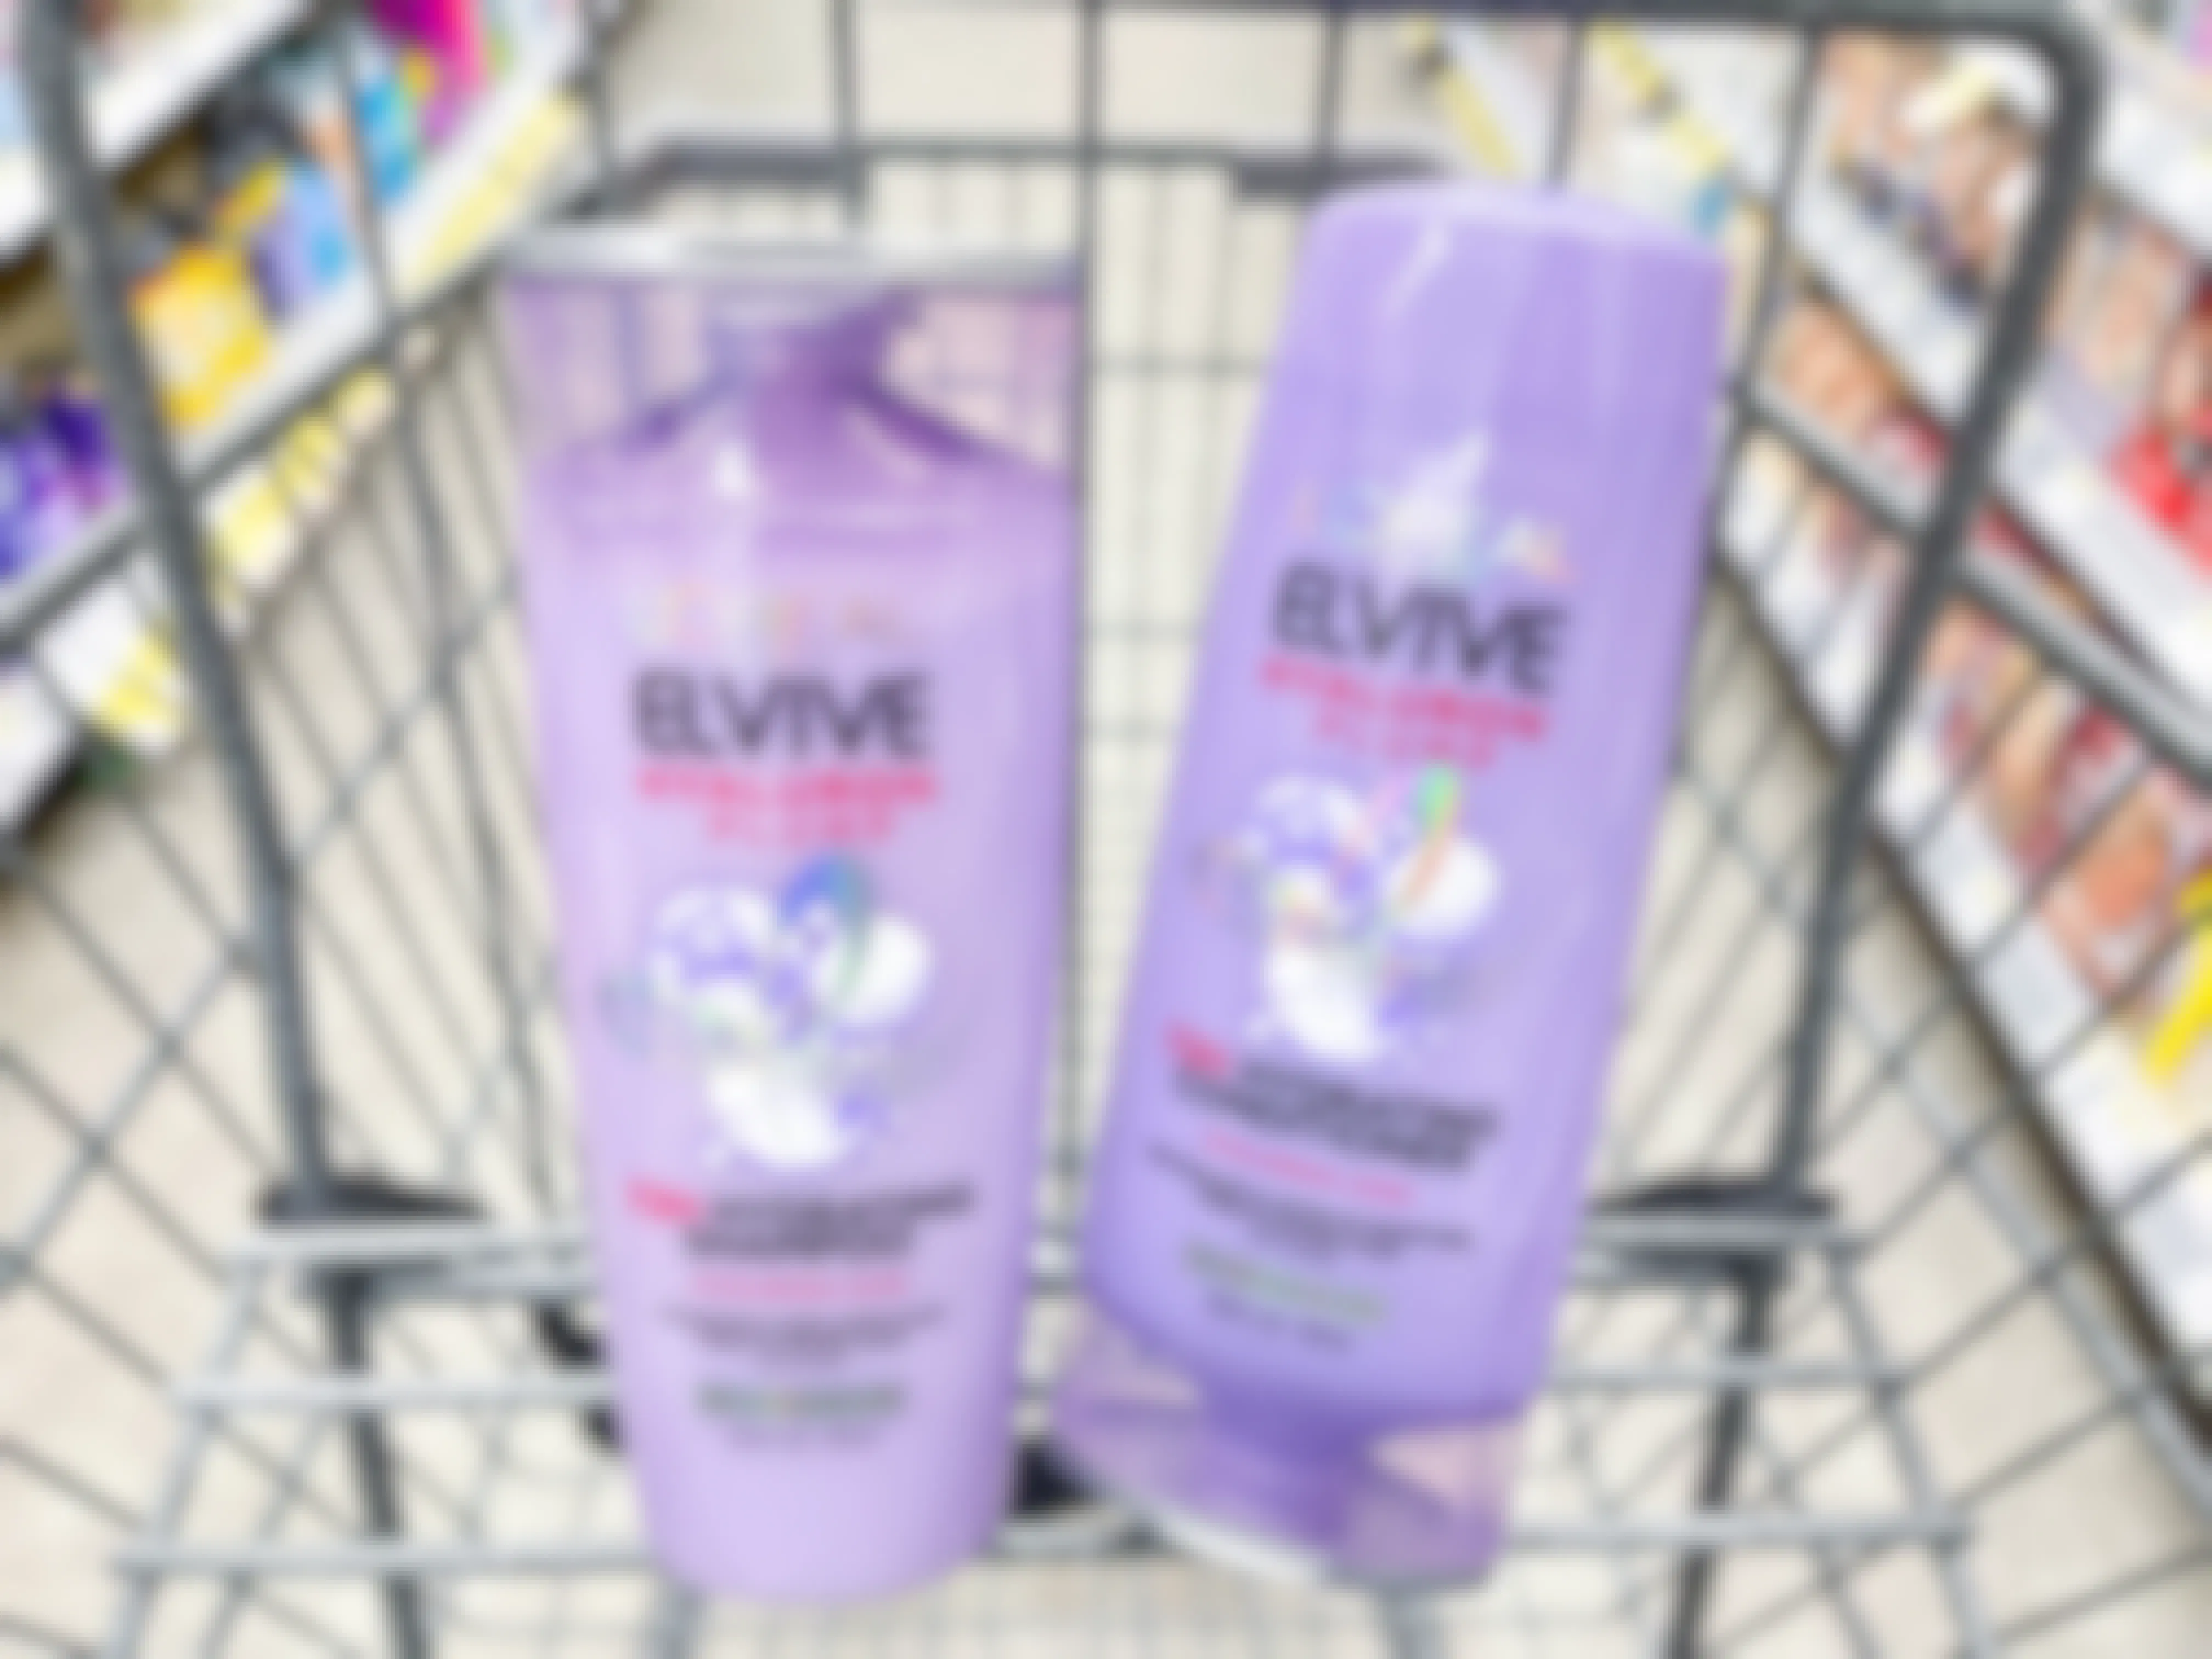 two bottle of l'oreal elvive in shopping cart